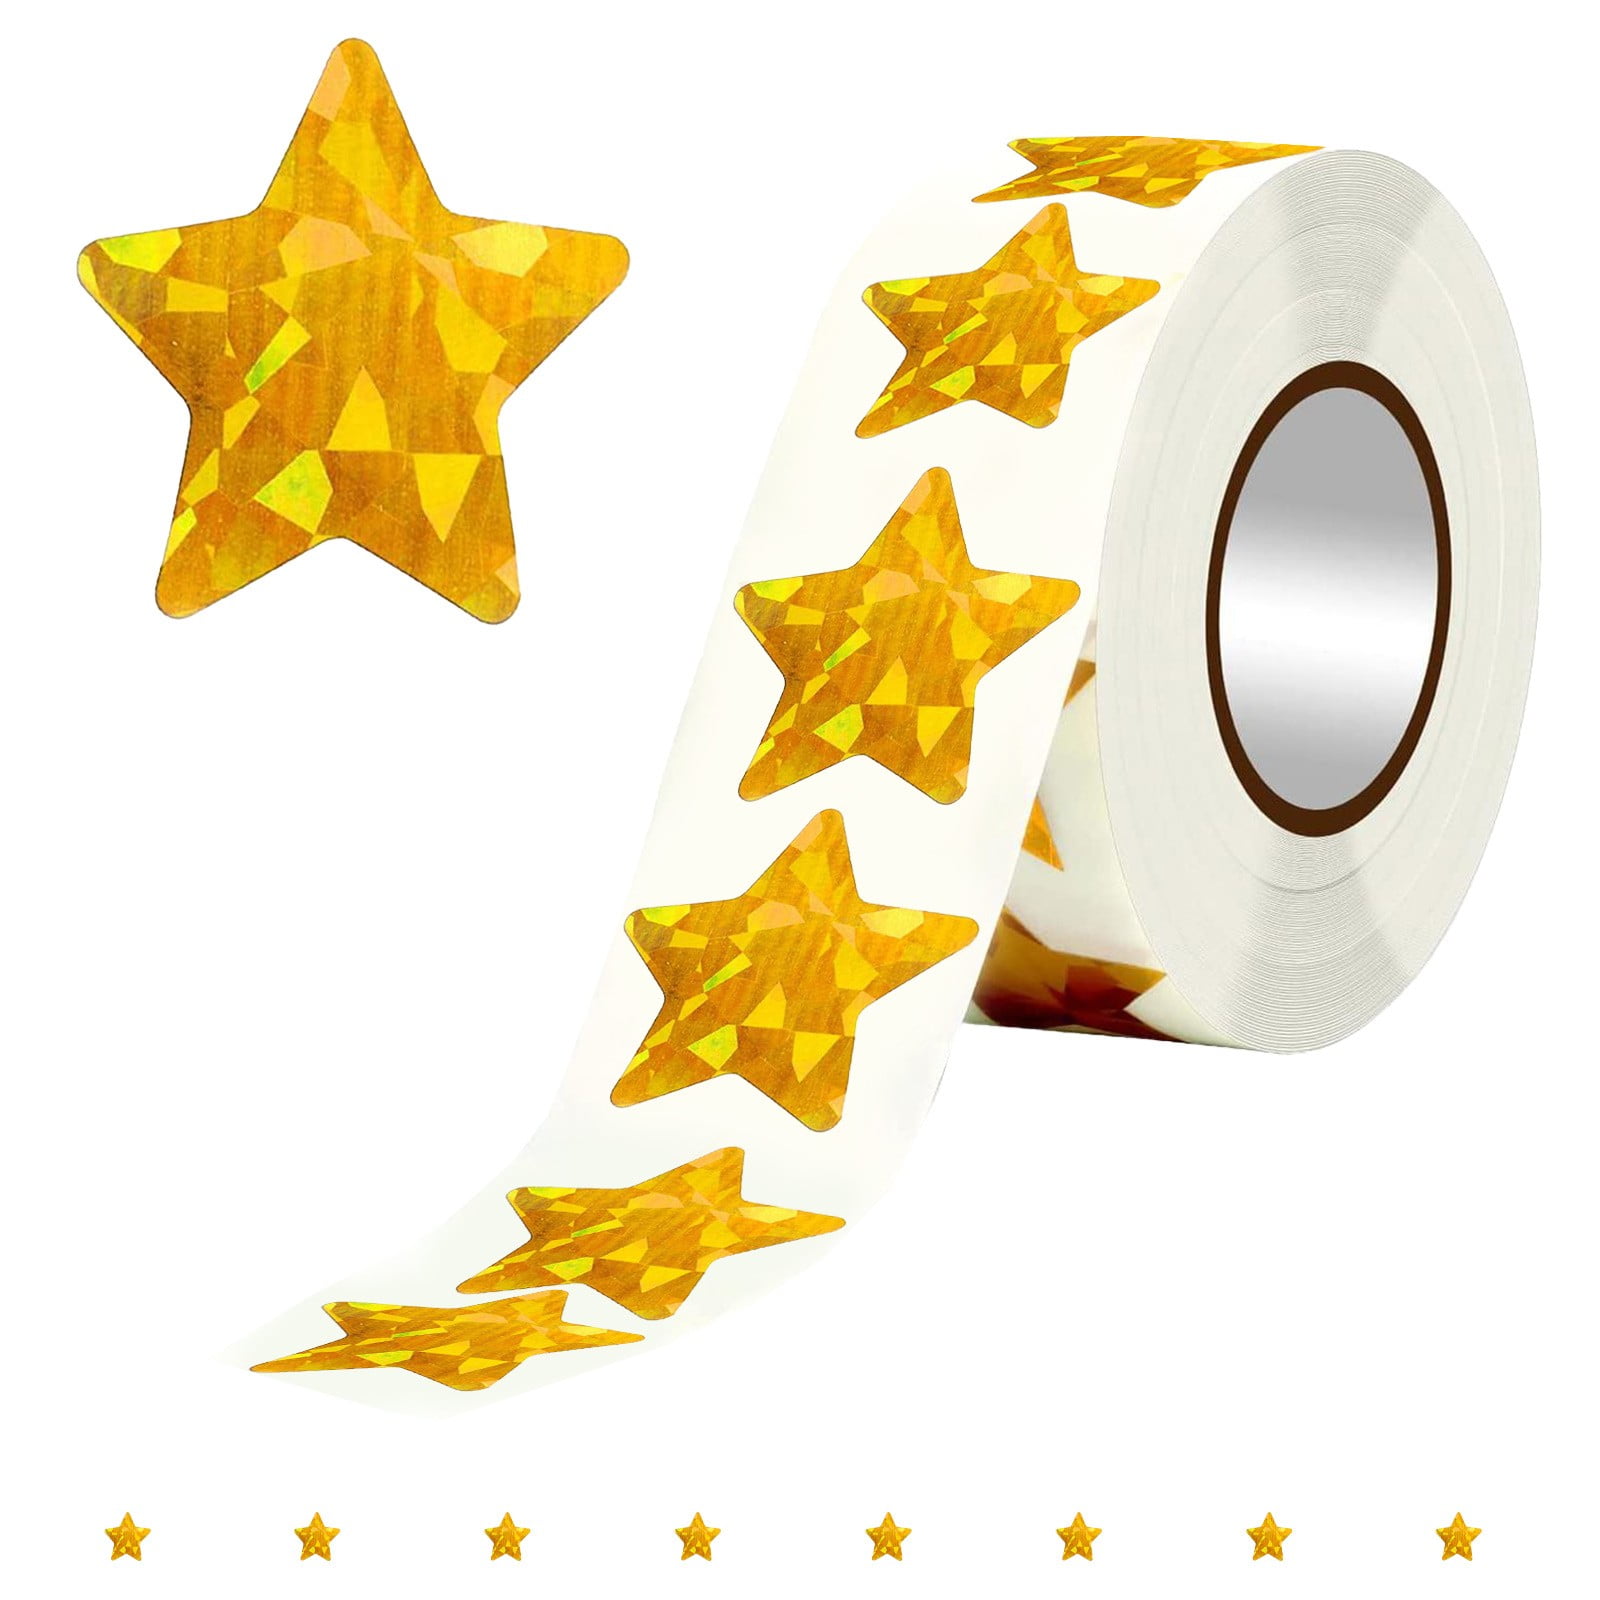  Glitter Star Foam Stickers - Sparkly Gold and Silver,Self  Adhesive for Kids Crafts - Large & Small Sticky Stars Shape Pack of 208 PCS.